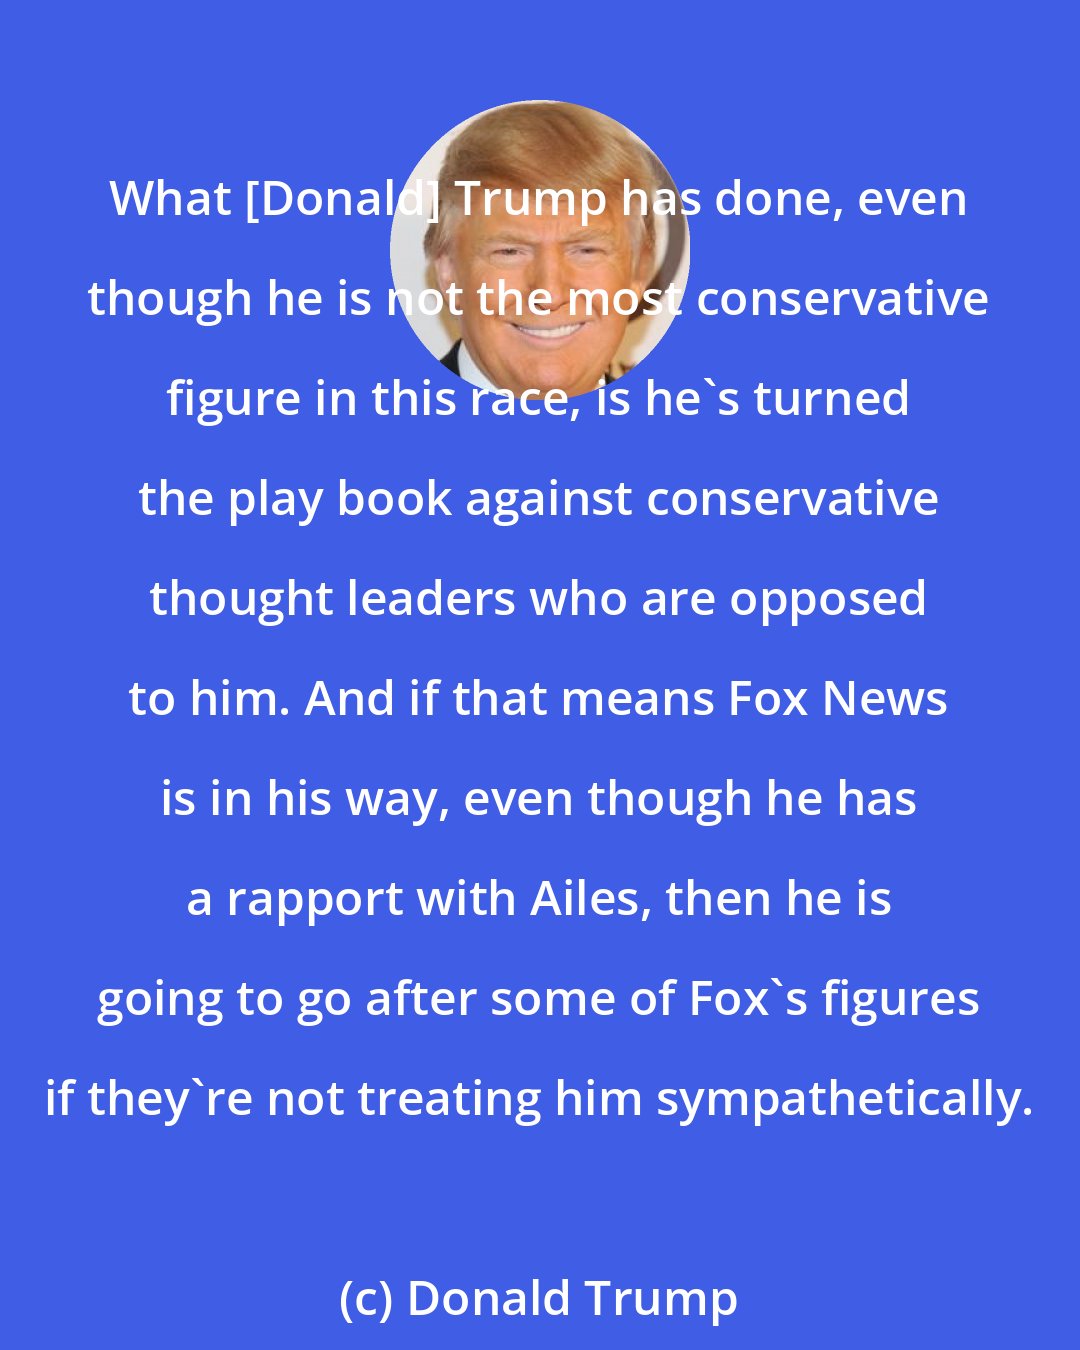 Donald Trump: What [Donald] Trump has done, even though he is not the most conservative figure in this race, is he`s turned the play book against conservative thought leaders who are opposed to him. And if that means Fox News is in his way, even though he has a rapport with Ailes, then he is going to go after some of Fox`s figures if they`re not treating him sympathetically.